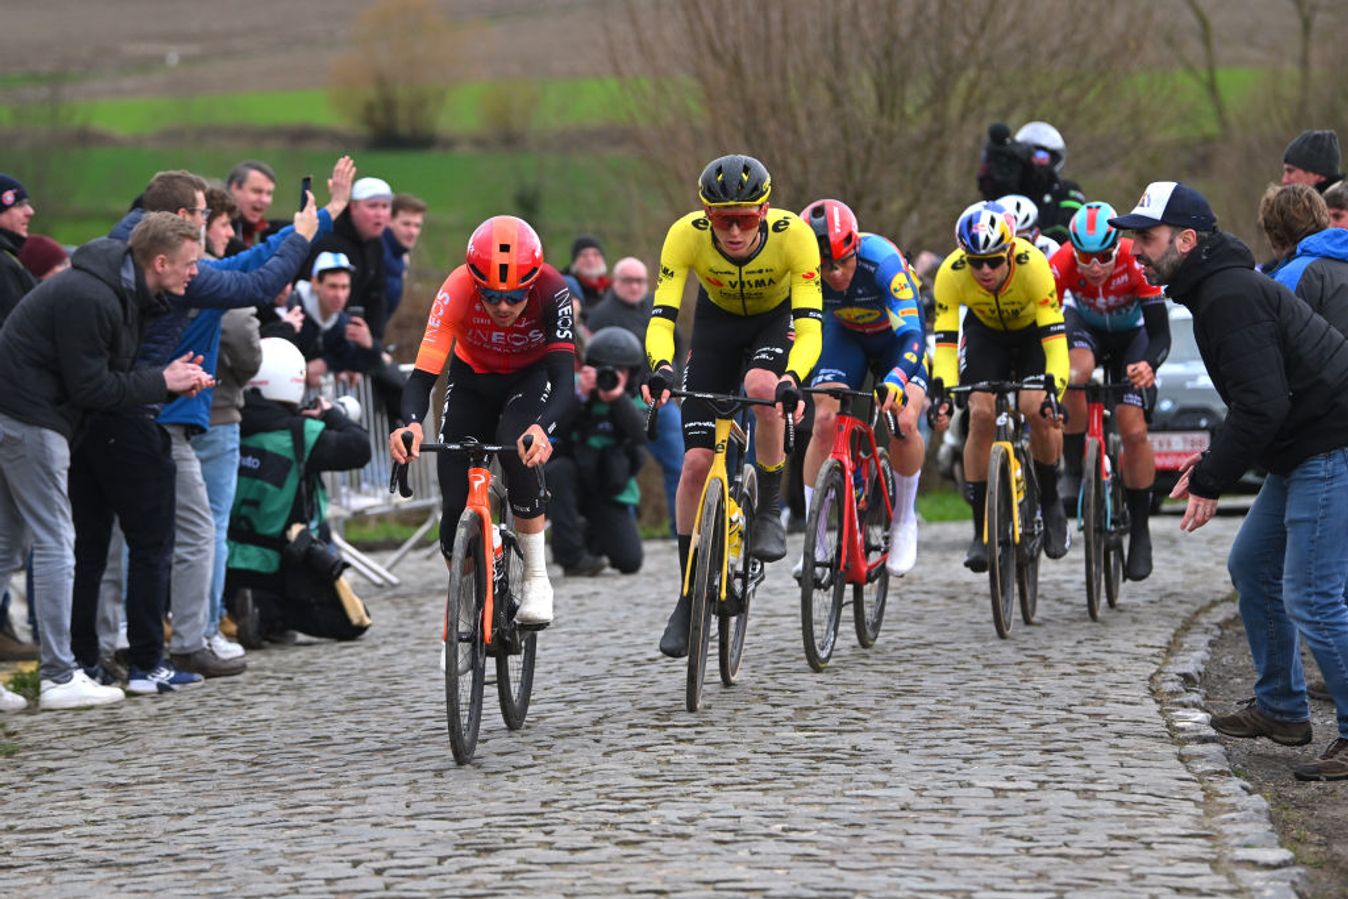 The lead selection on the cobbles